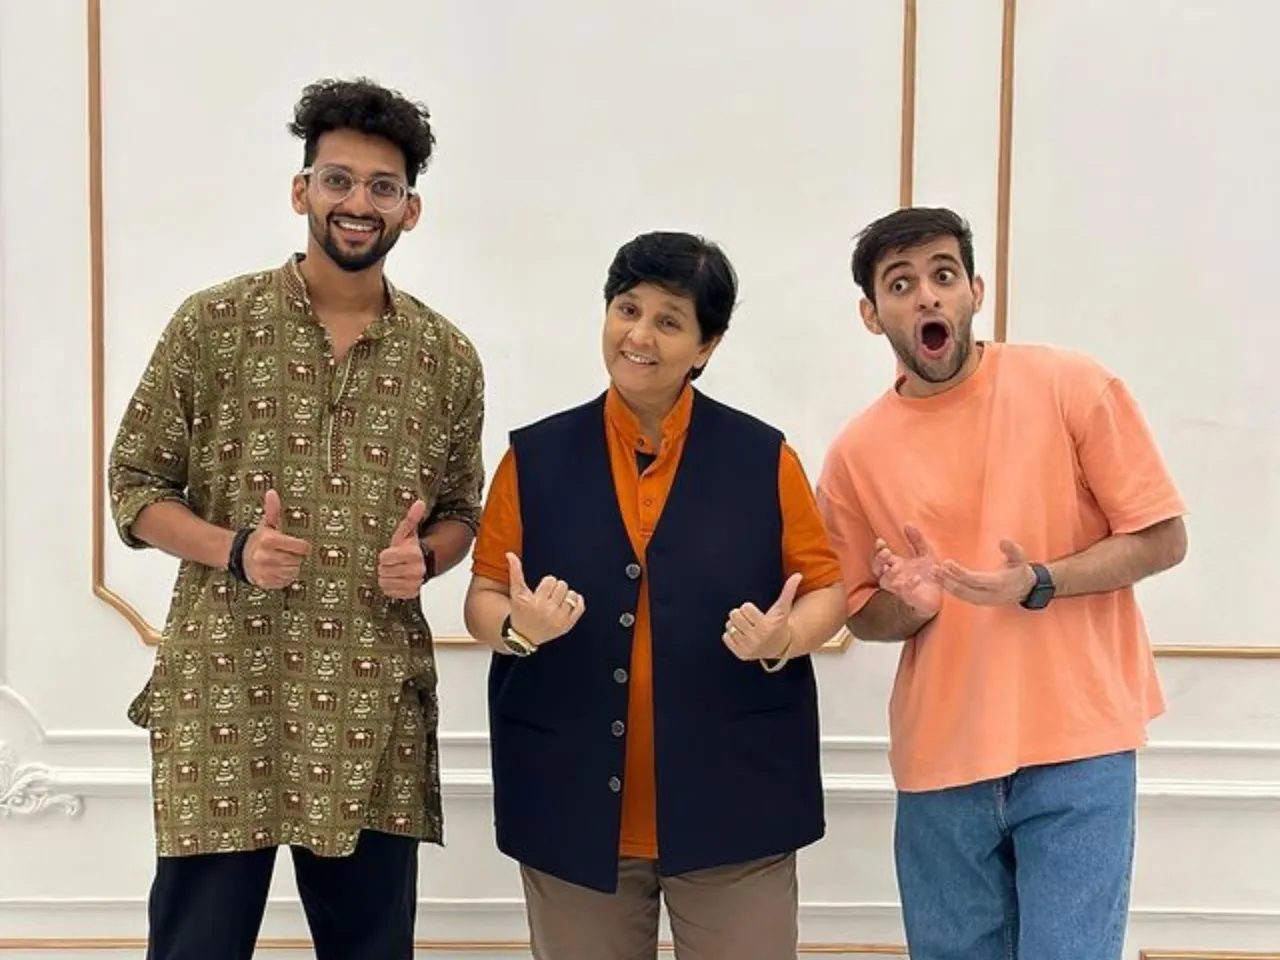 Funcho live their dream to jam with Falguni Pathak as they collaborate to host a Garba night